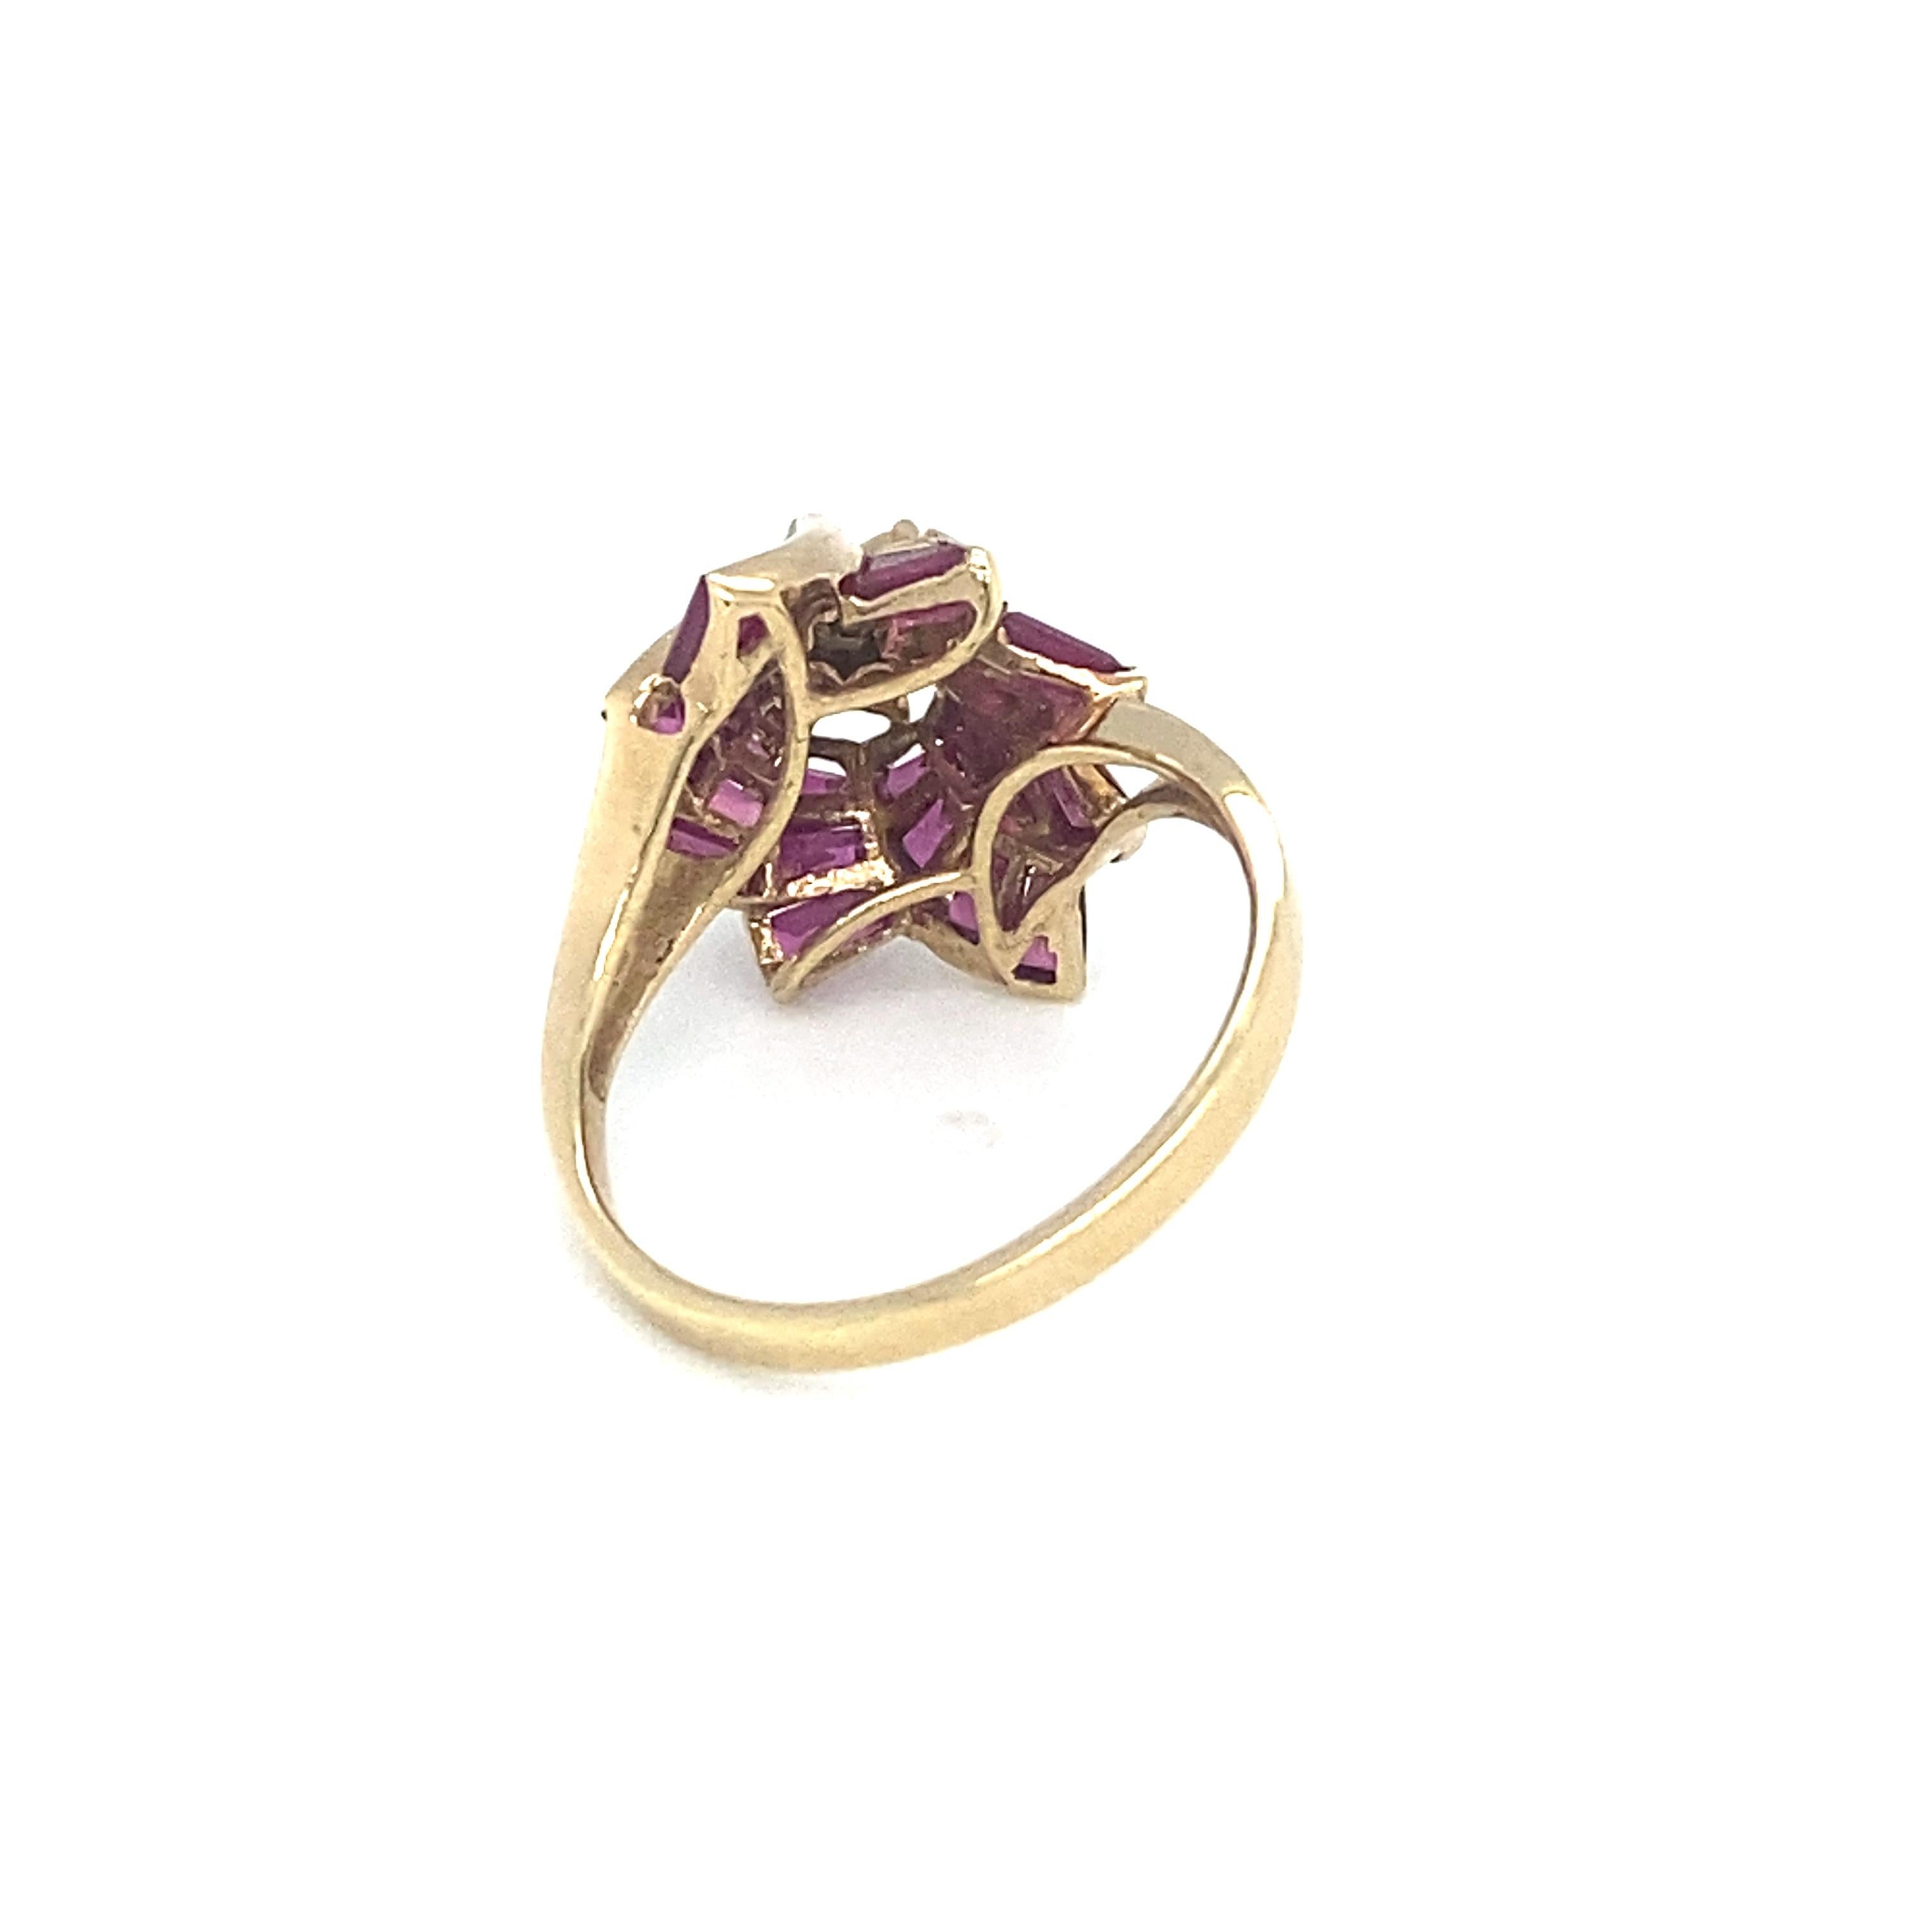 Item Details: This ring has a flower design with diamonds and baguette cut rubies.

Circa: 1980s
Metal Type: 14k yellow gold
Weight: 3.4g
Size: US 6, resizable

Diamond Details:

Carat: 0.10 carat total weight
Shape: Round
Color: G
Clarity: VS

Ruby